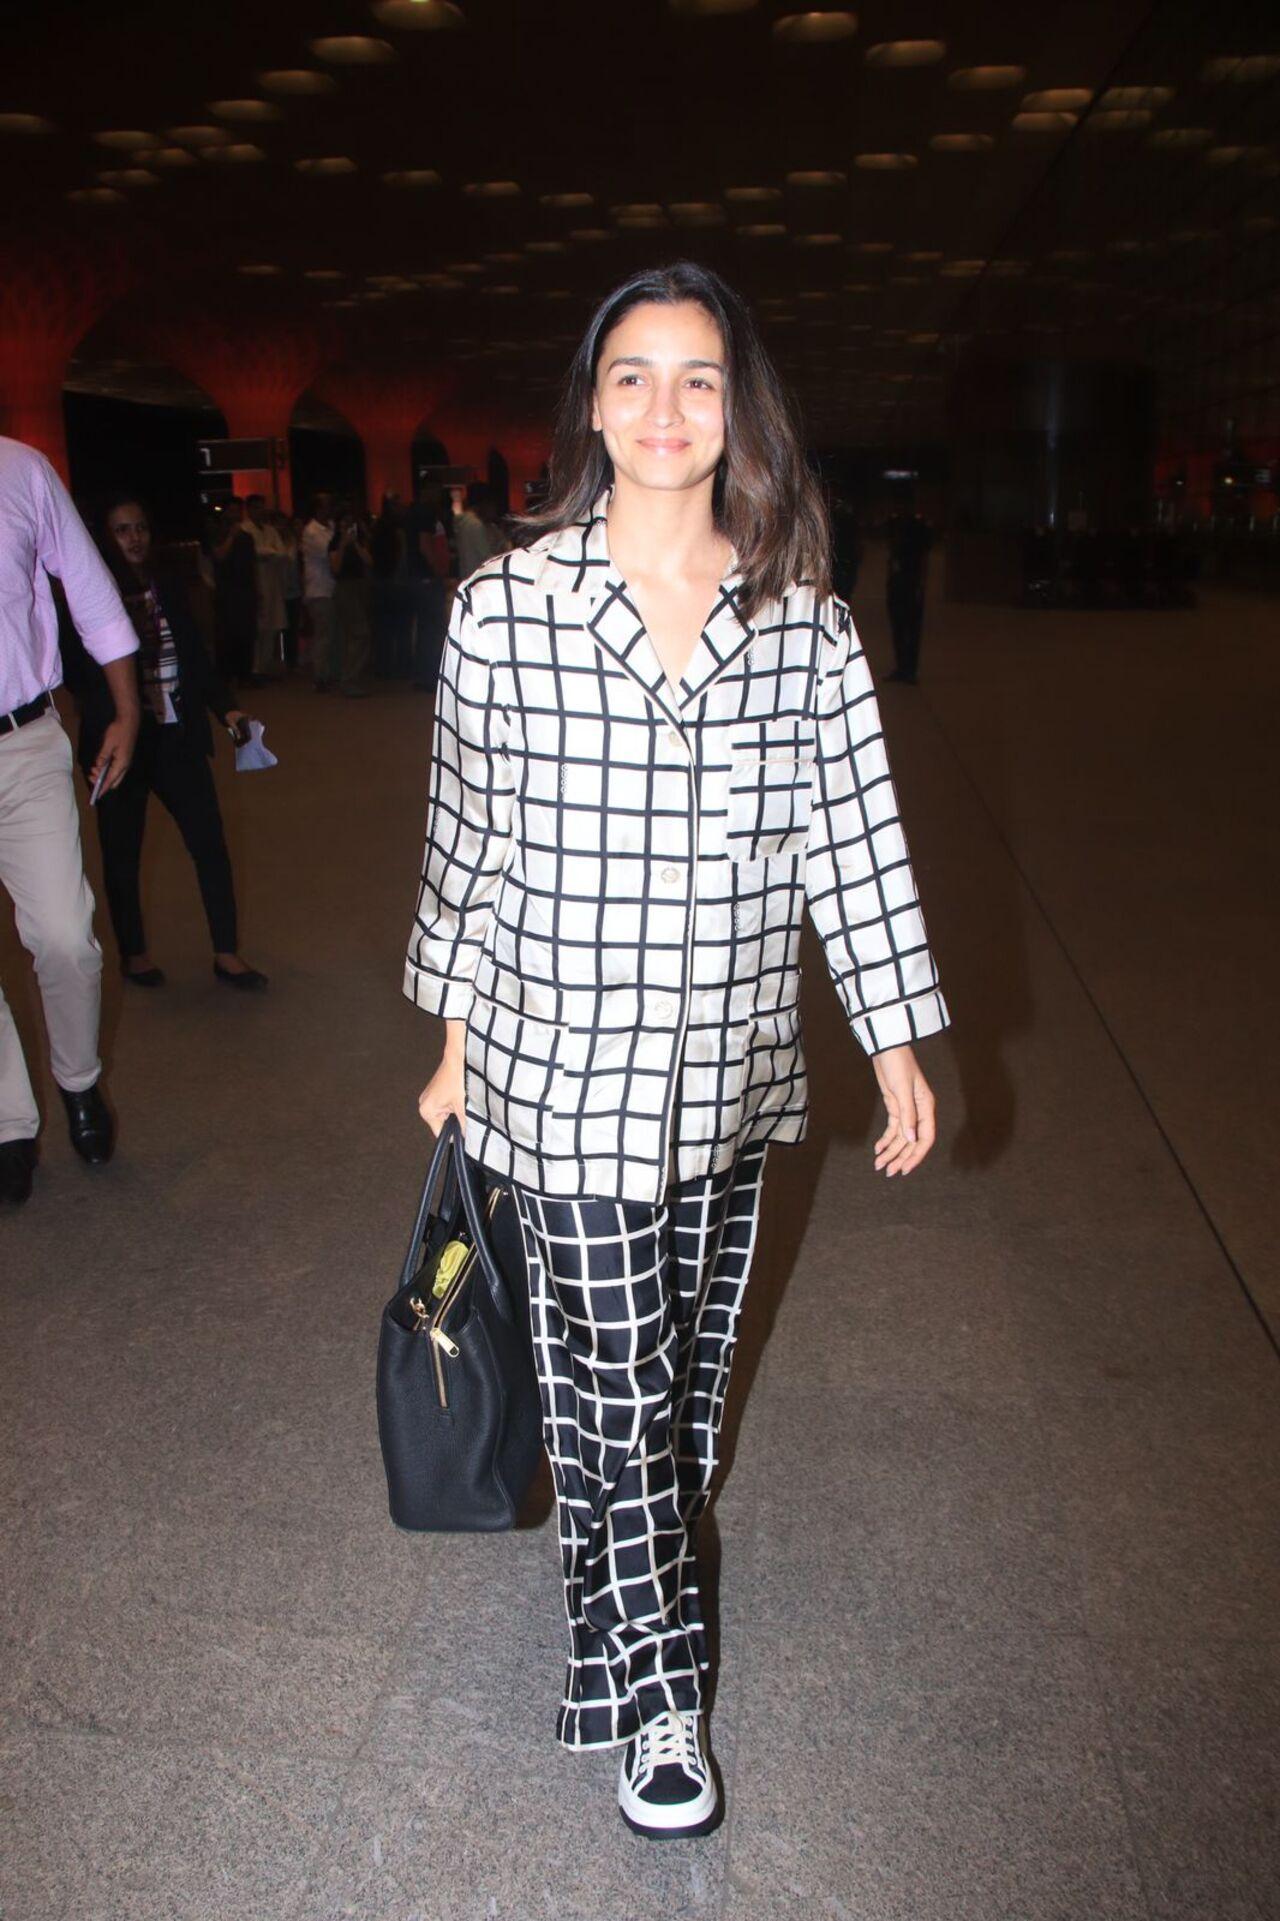 Alia Bhatt opted for a stylish black and white outfit as she was clicked at the airport